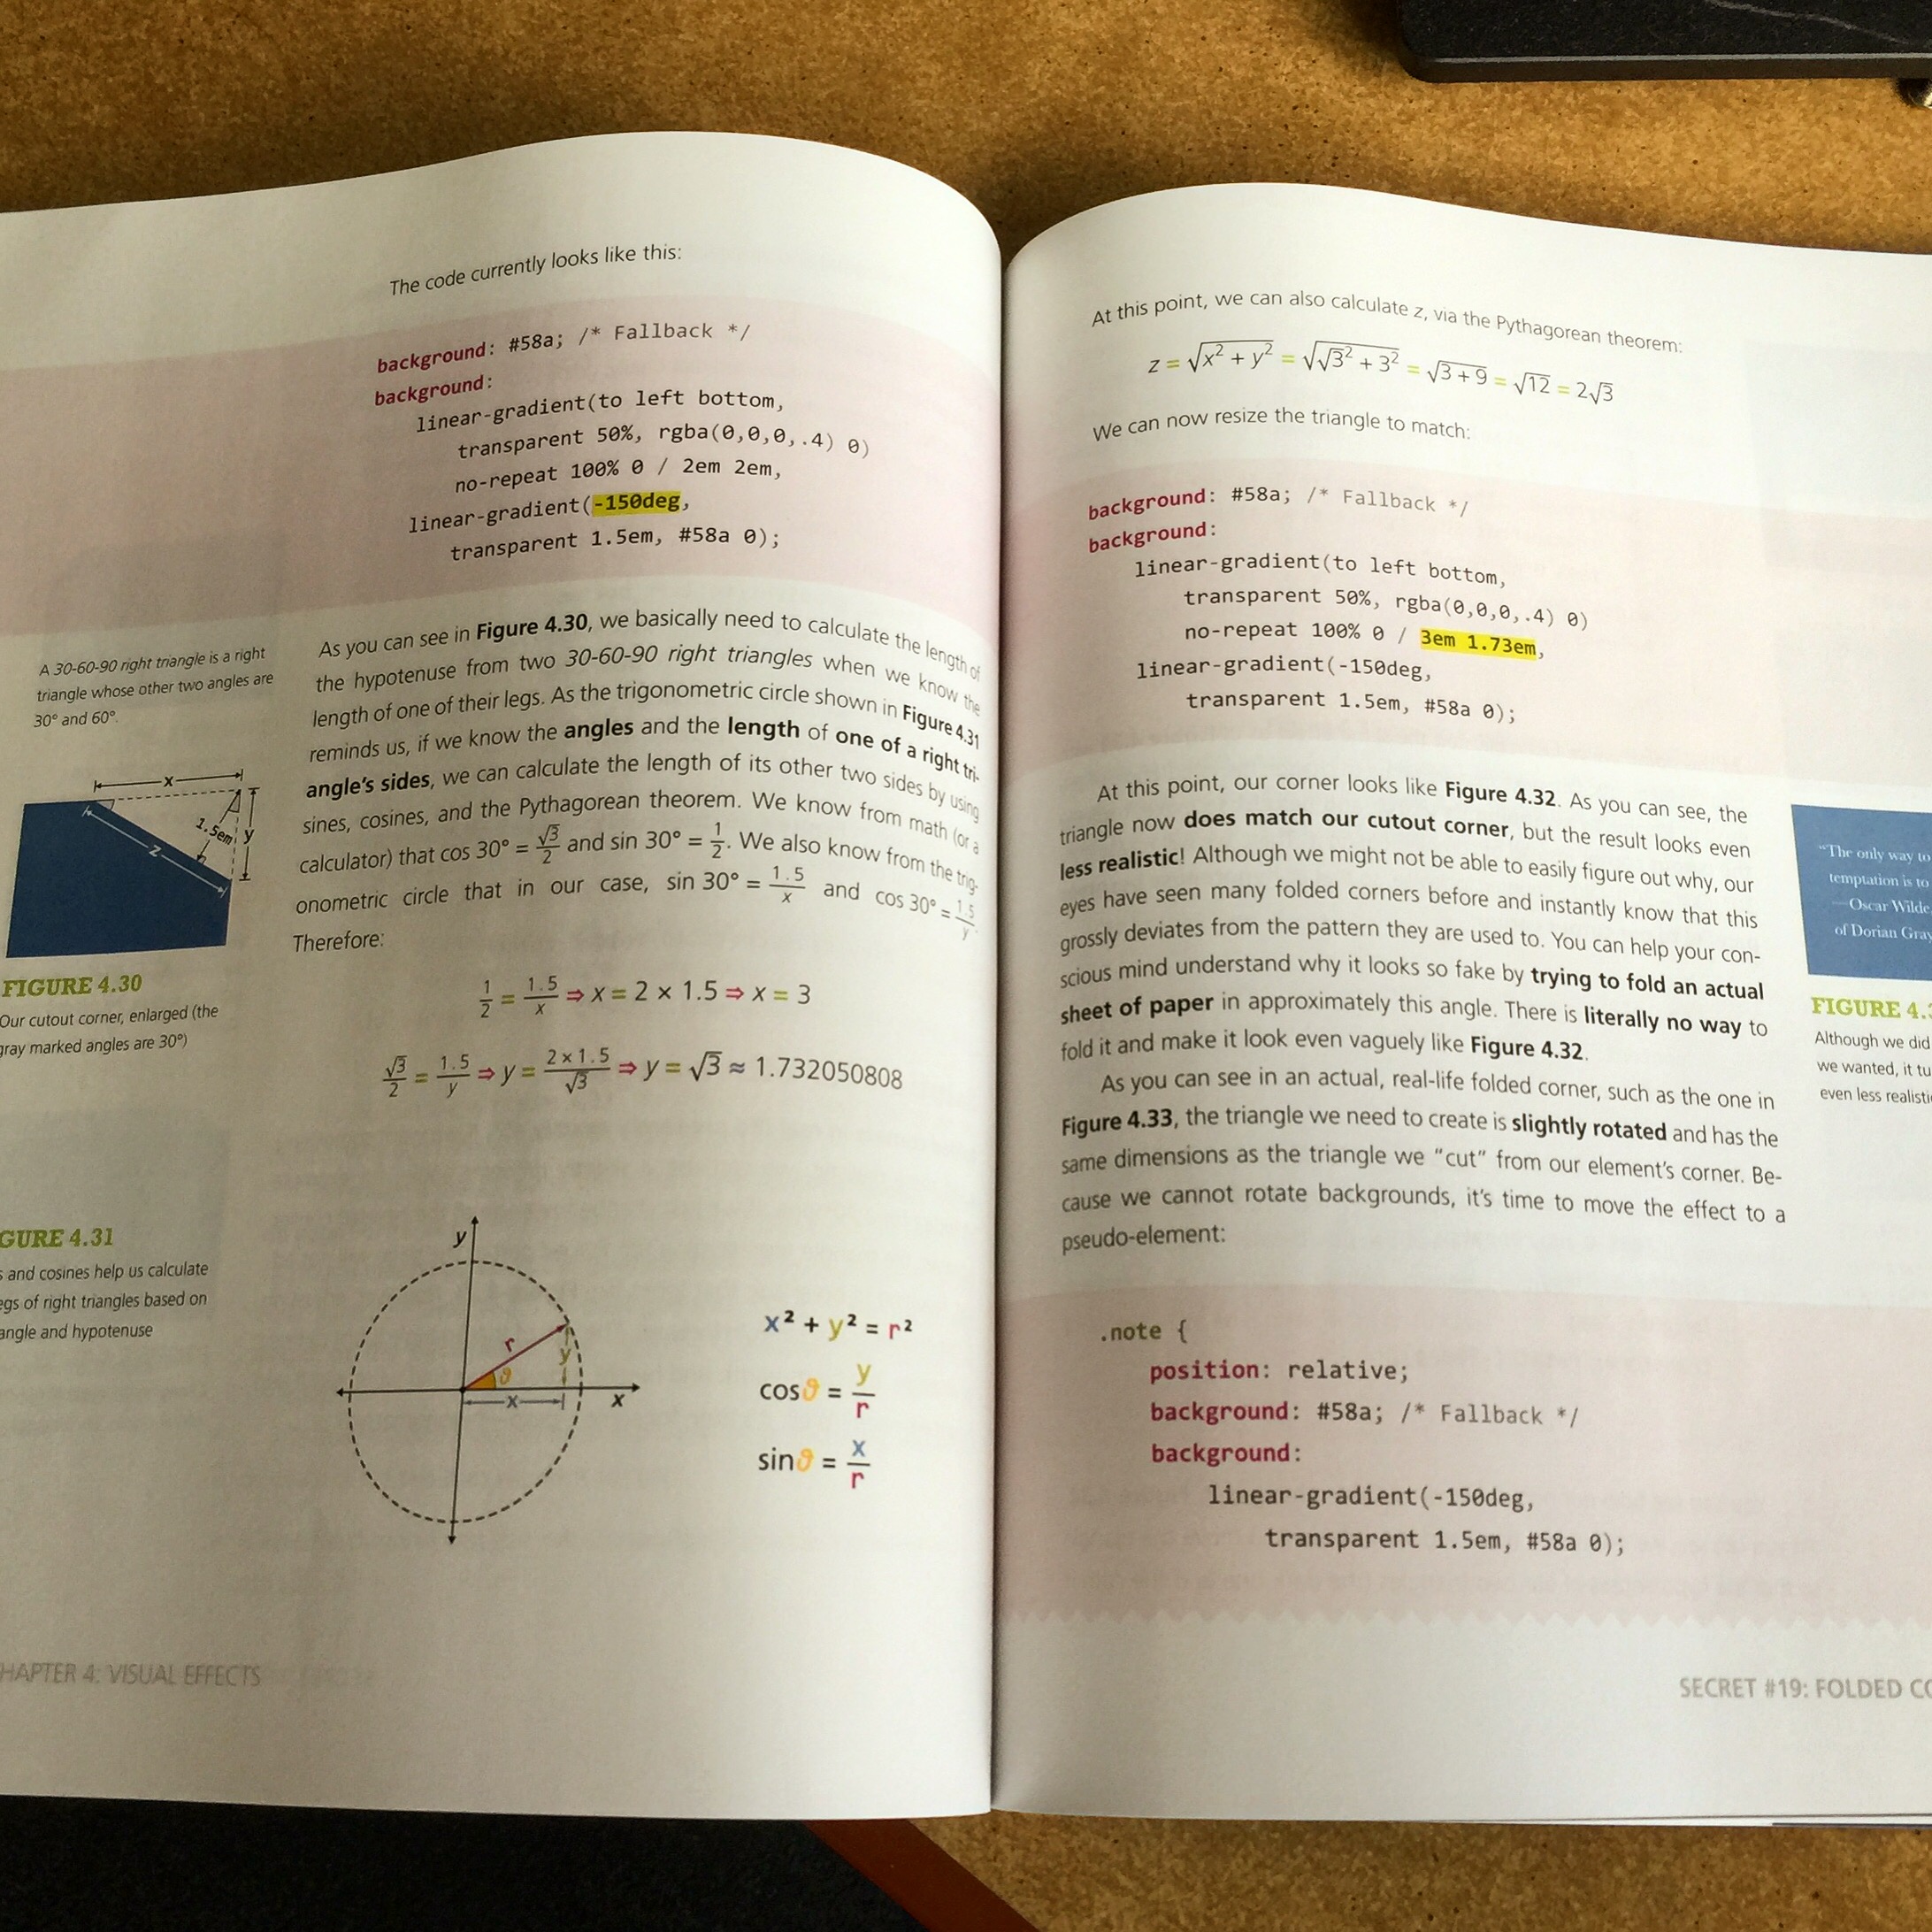 CSS Secrets, open in a spread showing a section with geometry